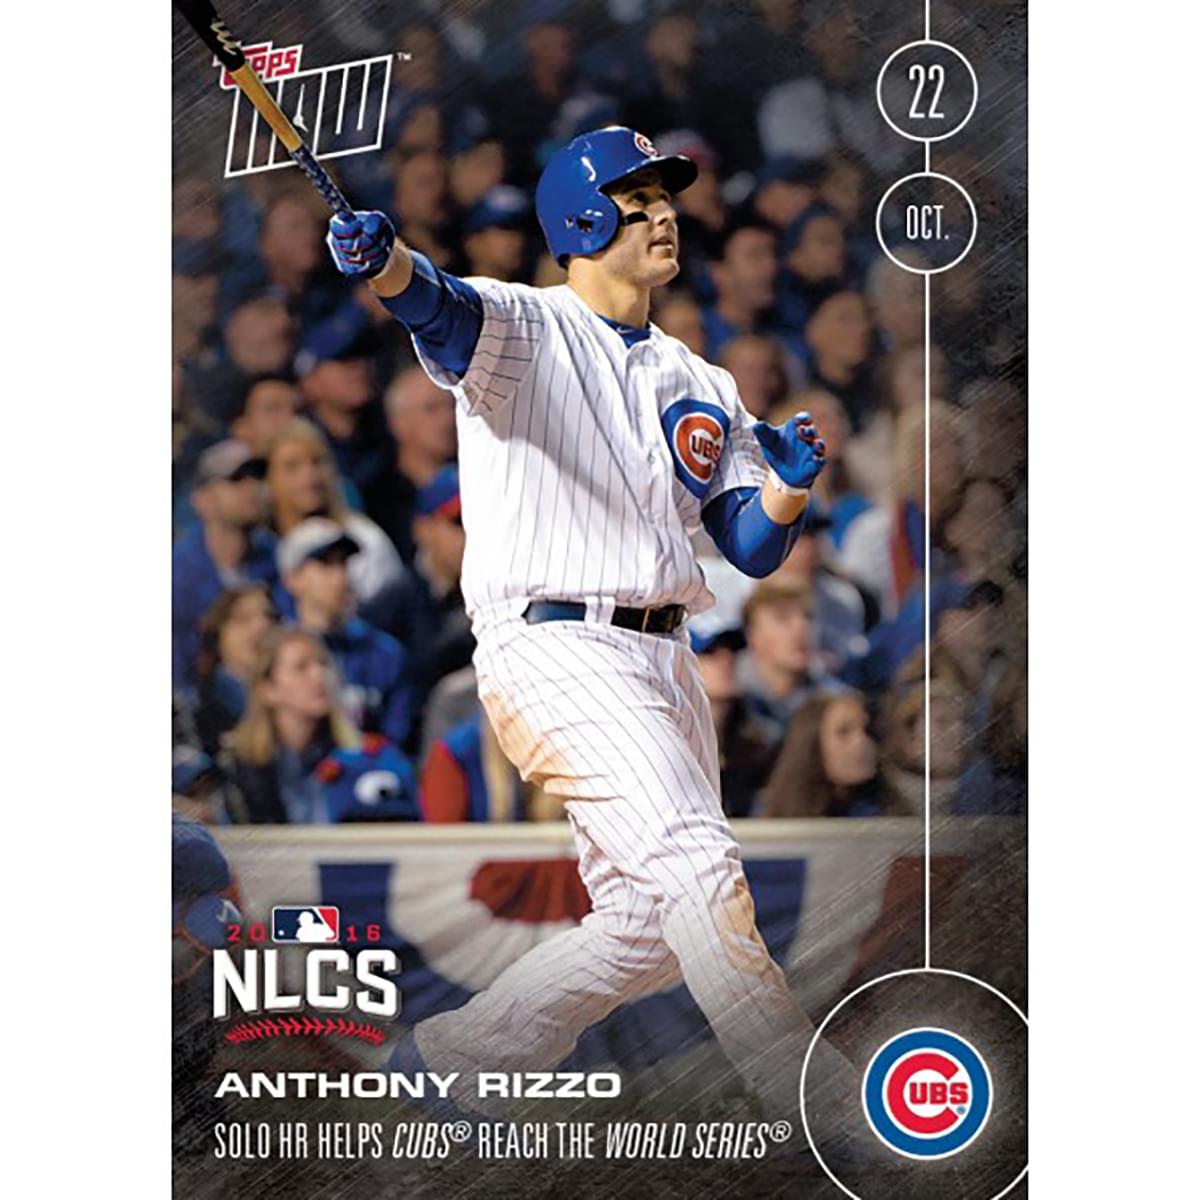 MLB Chicago Cubs Anthony Rizzo #616 2016 Topps NOW Trading Card